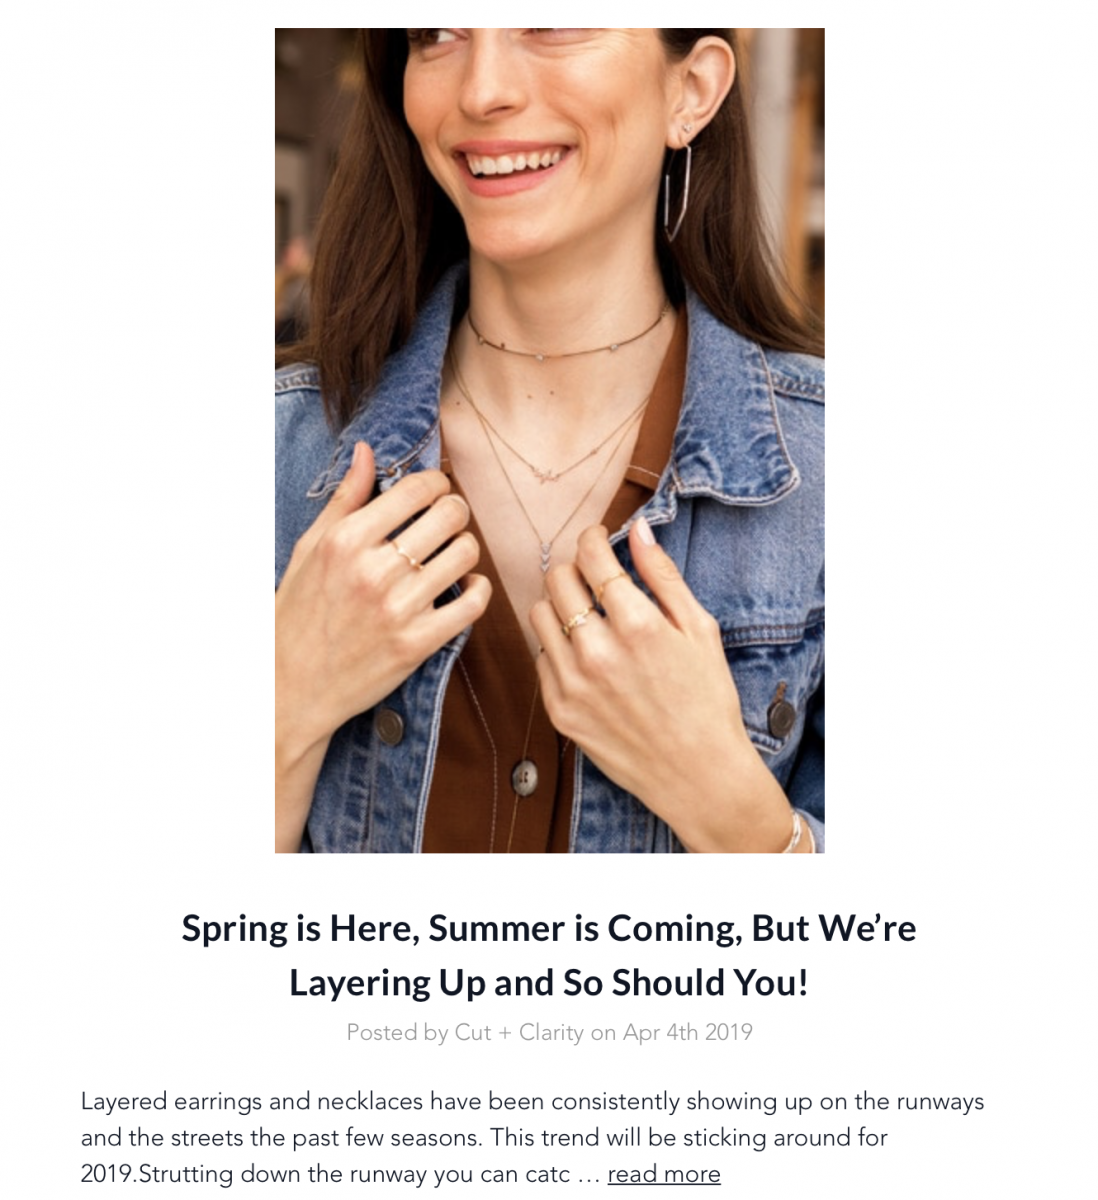 Spring is Here, Summer is Coming, But We’re Layering Up and So Should You! by Ruth Jordan